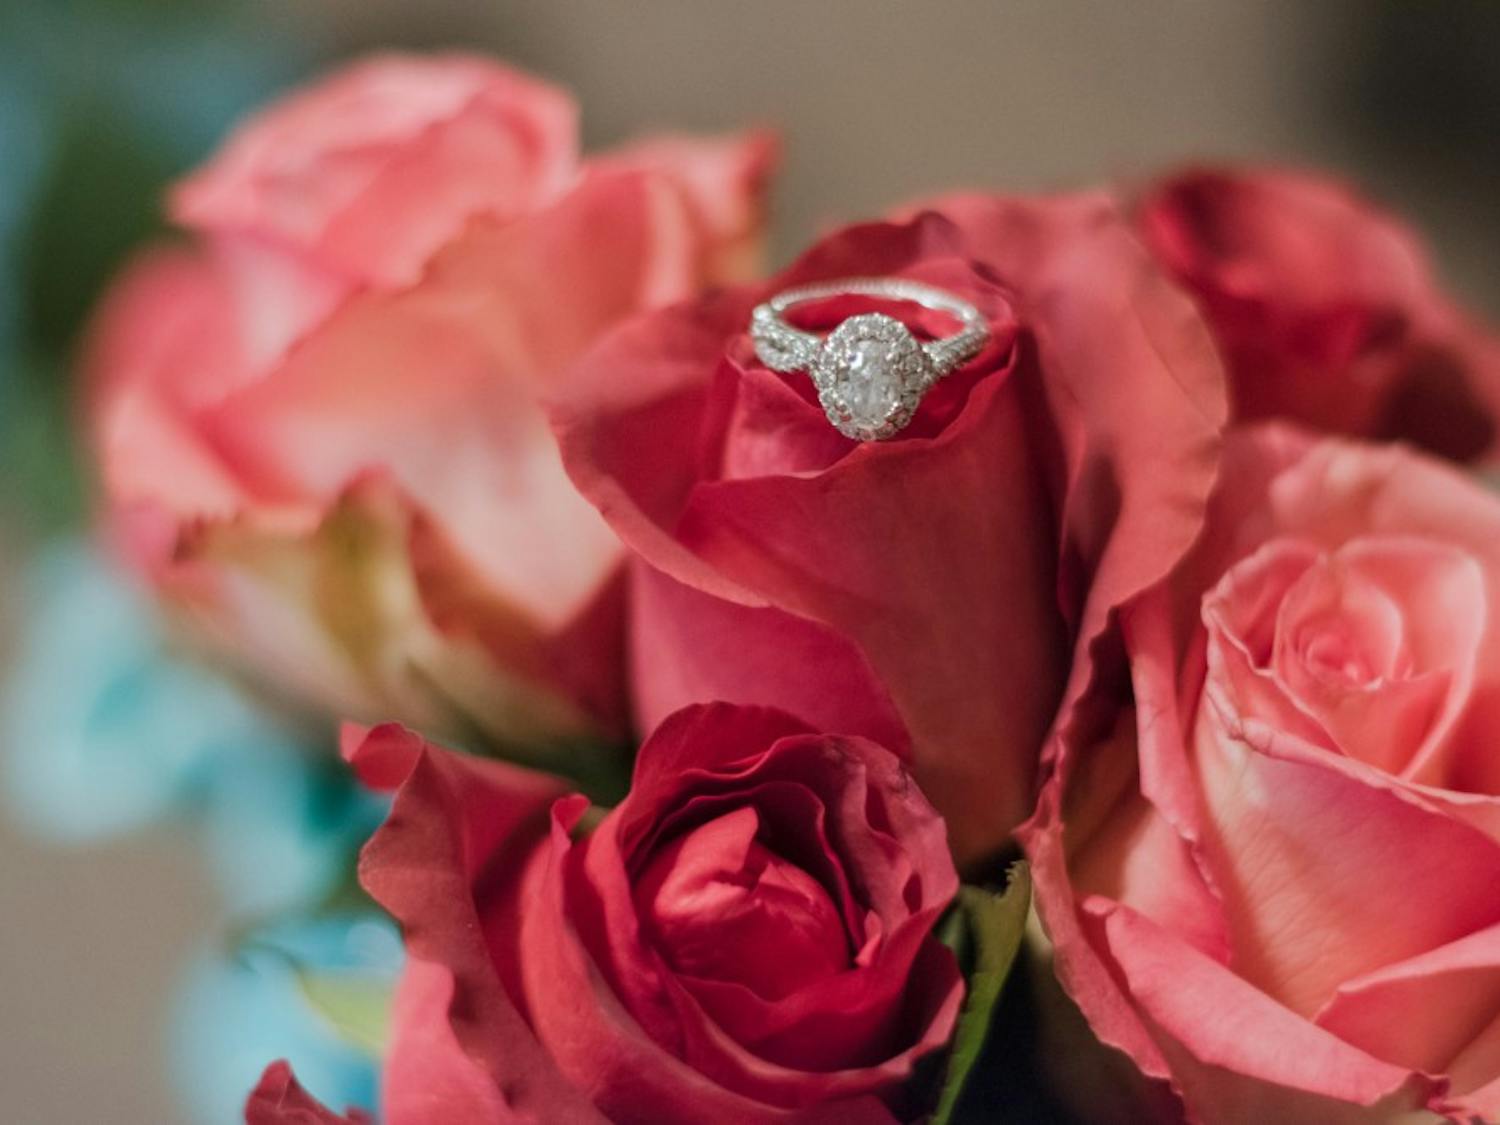 A Verragio diamond engagement ring sits on top of a vase of roses on Monday, Feb. 5, 2018, in Auburn, Ala.